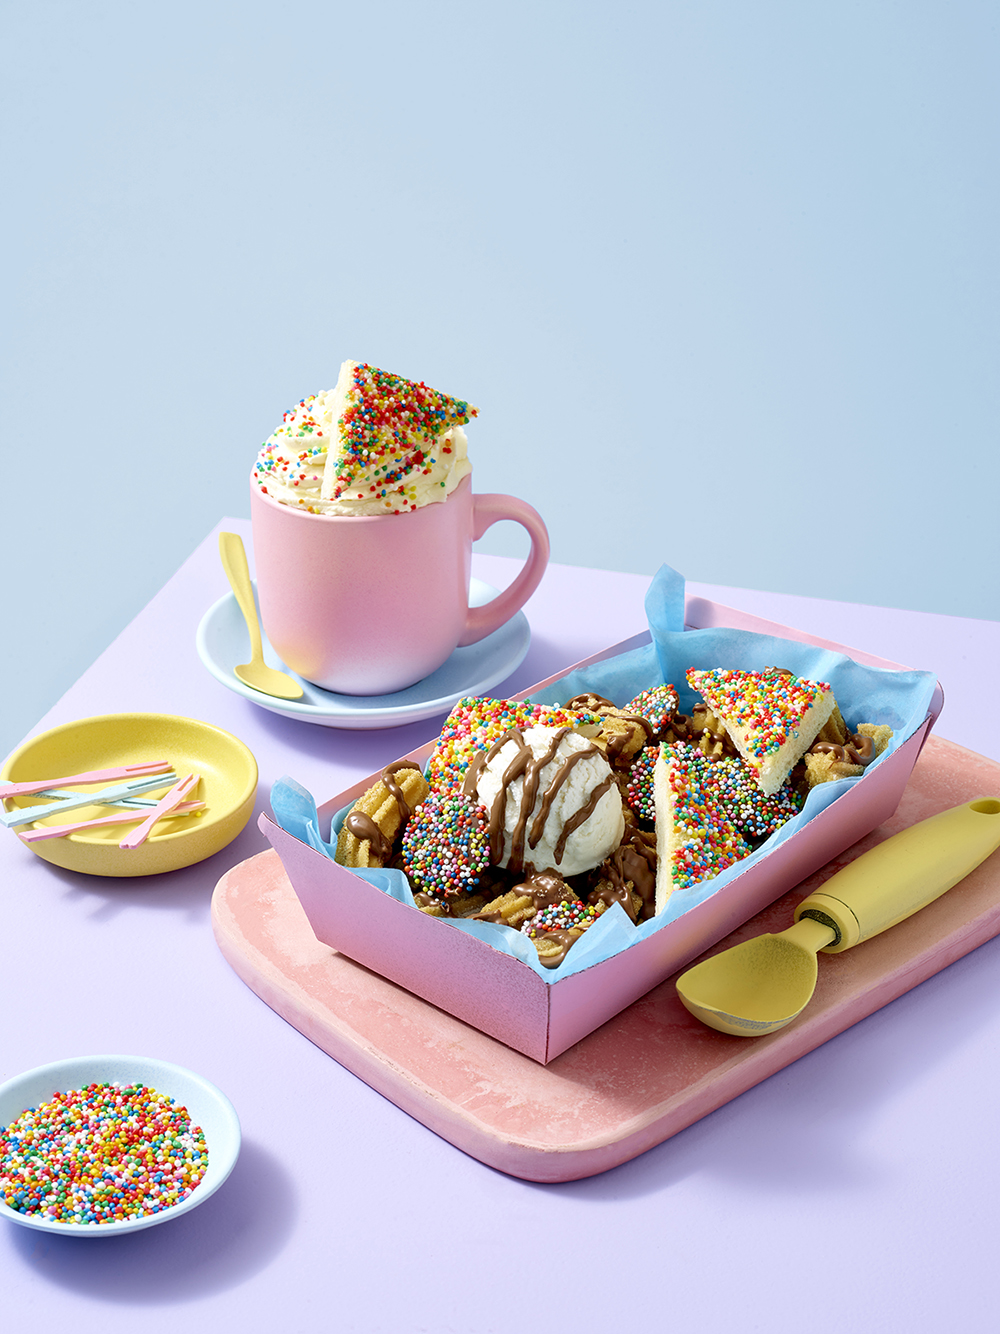 San Churro Fairy Bread Churros Snack Pack and Fairy Bread Hot Chocolate. Image supplied